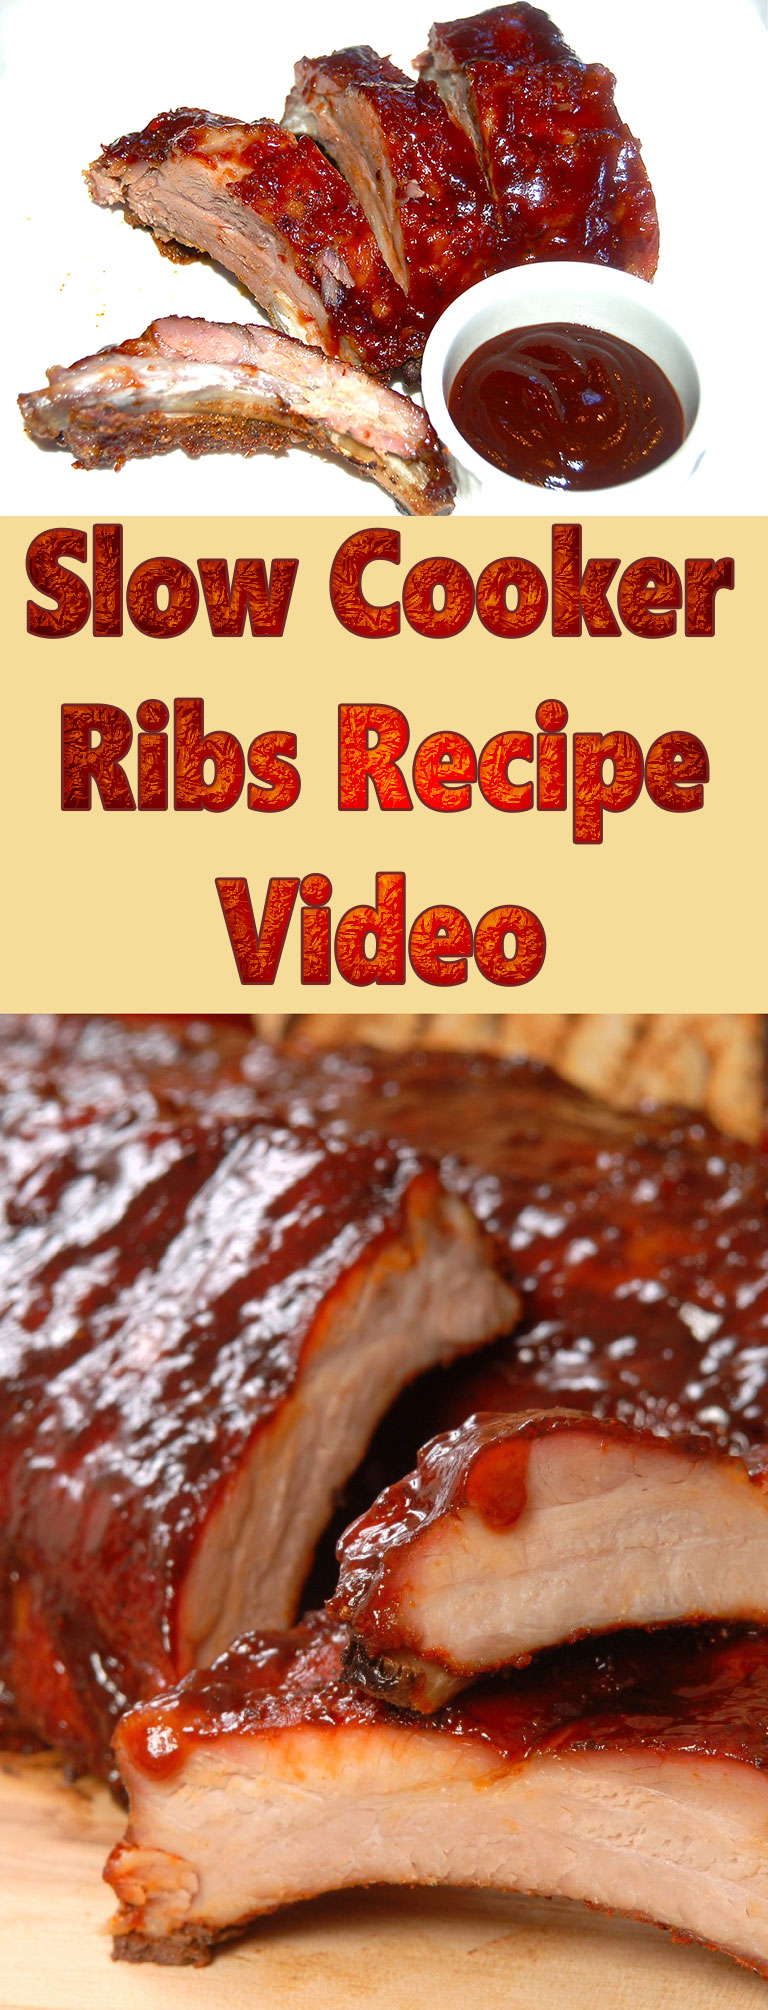 Slow Cooker Ribs Recipe Video